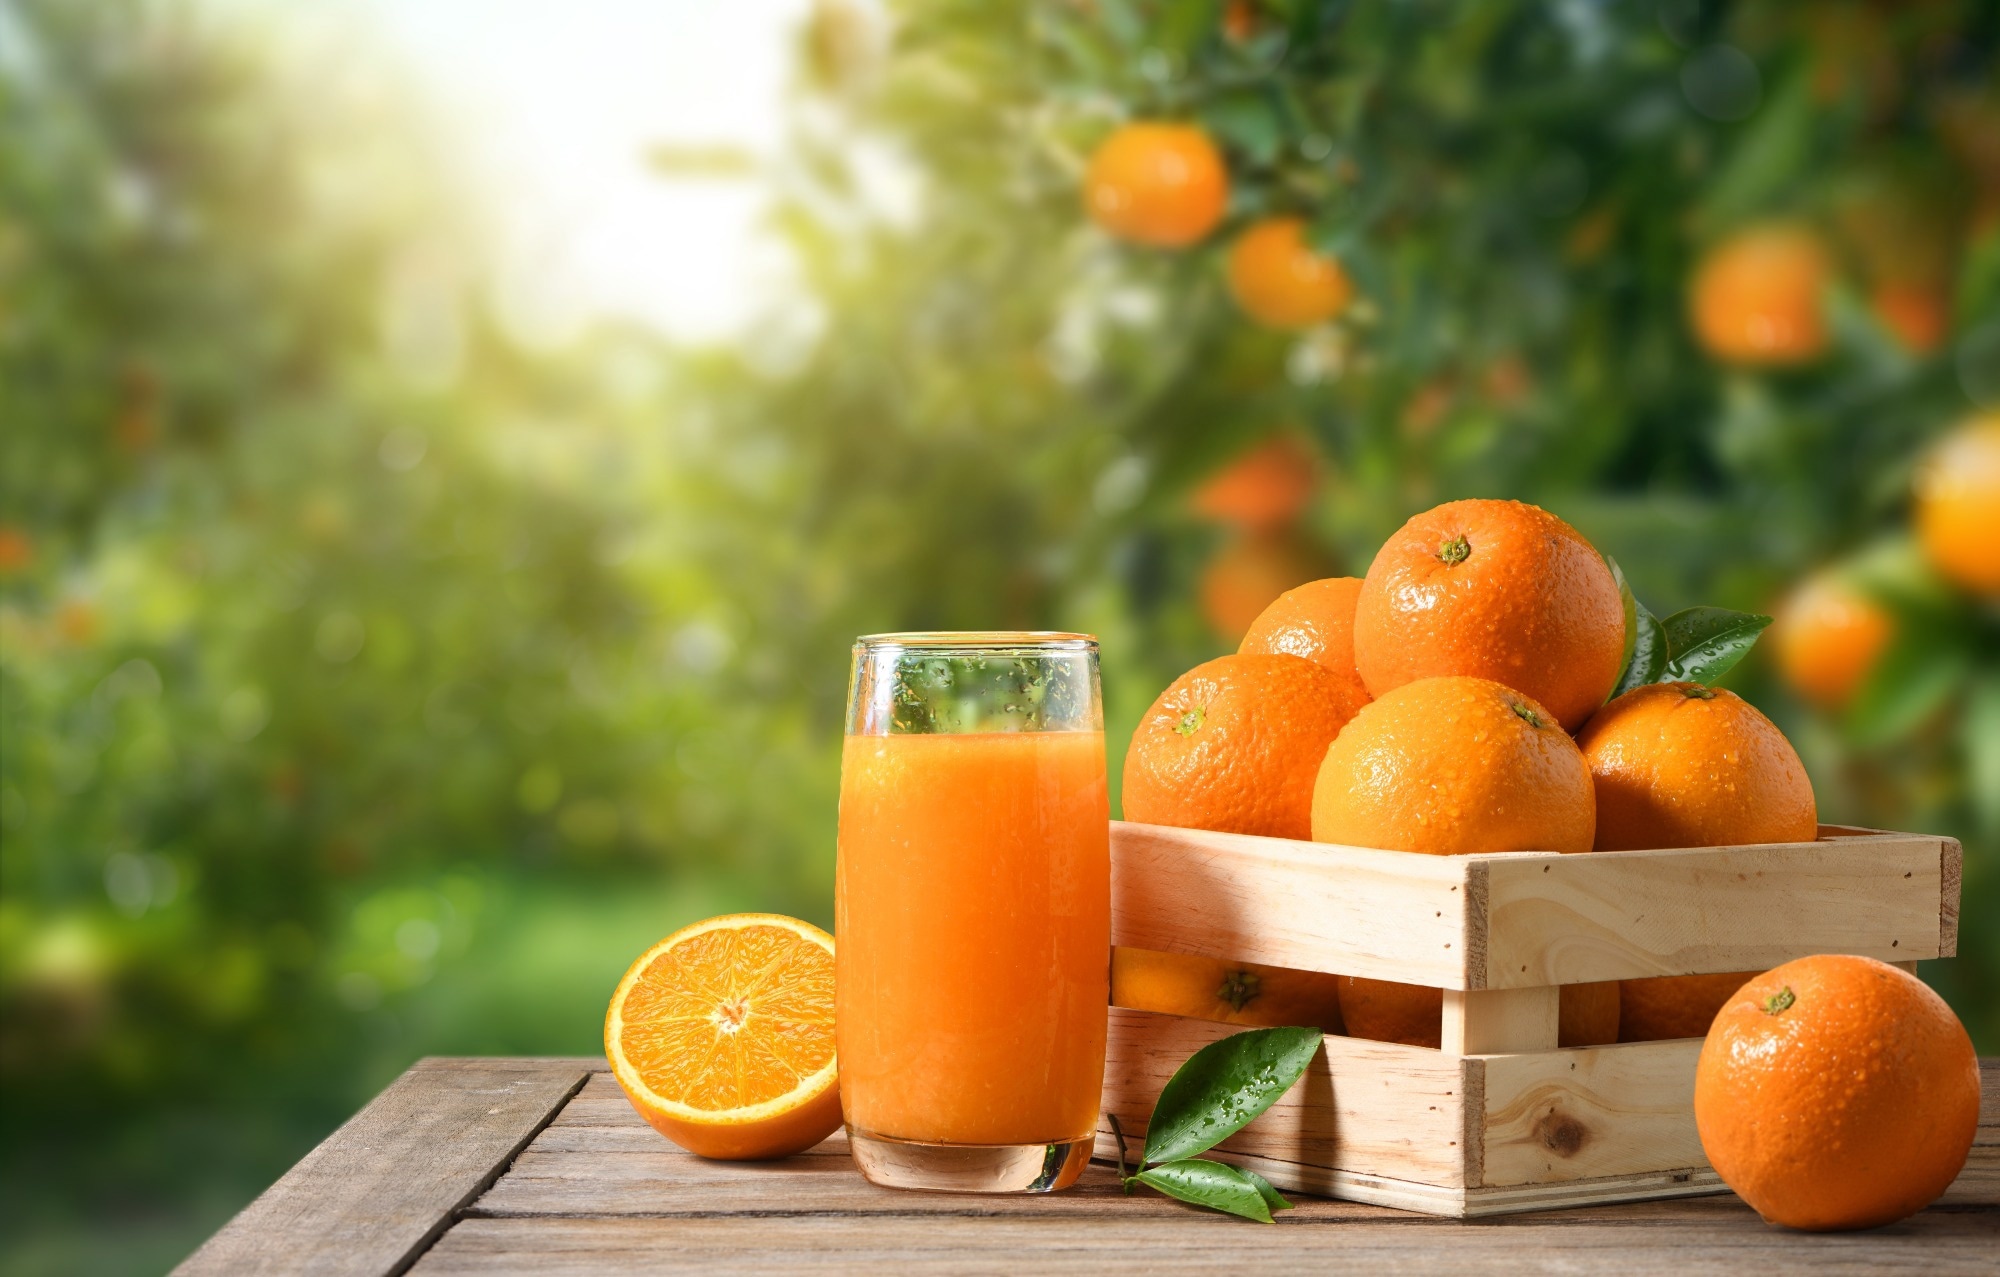 Study: Effect of 100% Orange Juice and a Volume-Matched Sugar-Sweetened Drink on Subjective Appetite, Food Intake, and Glycemic Response in Adults. Image Credit: Photoongraphy/Shutterstock.com